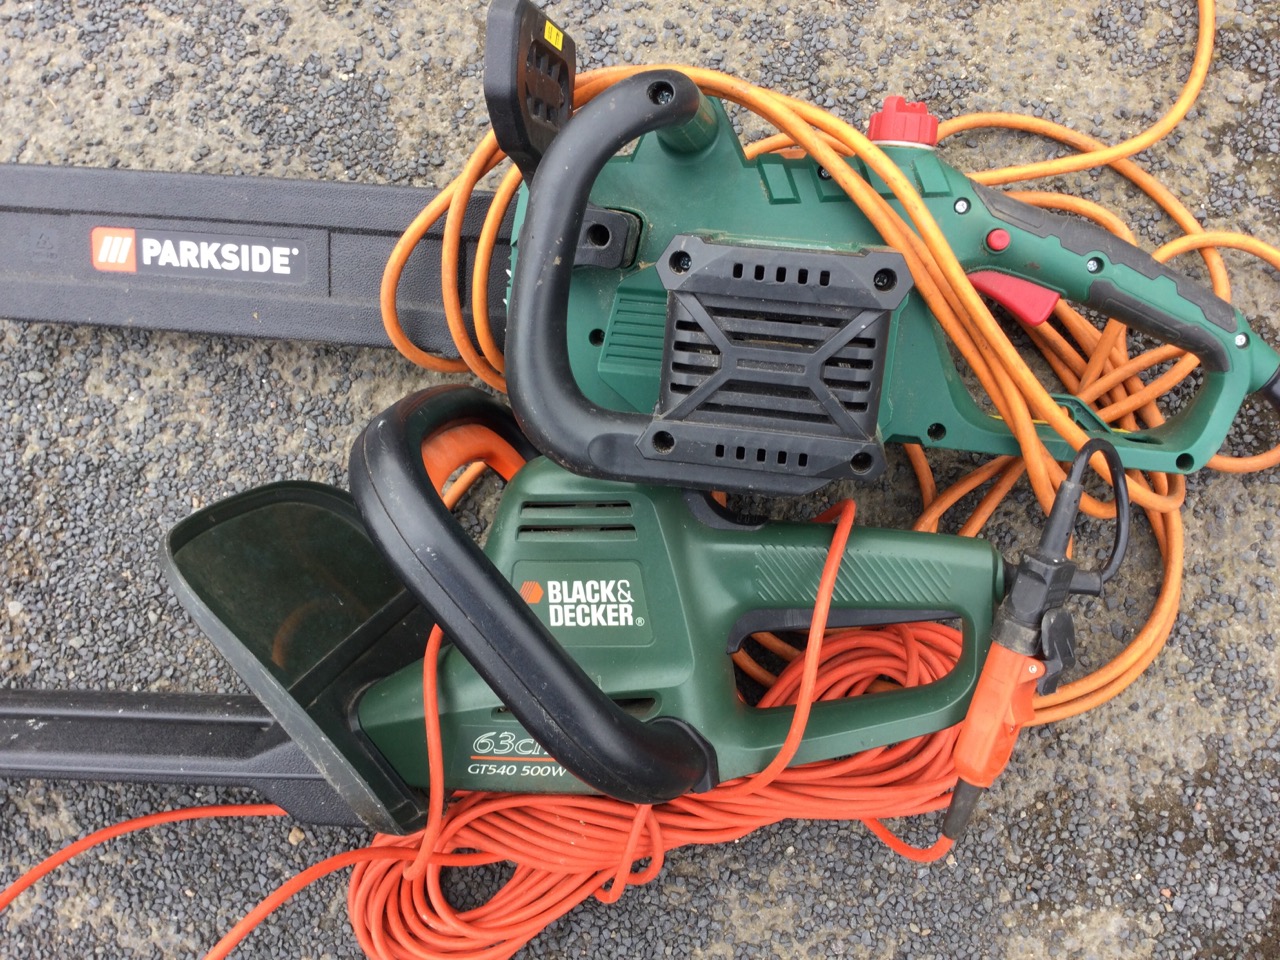 A Black & Decker 500w electric hedgecutter with long cable; and a Parkside electric chainsaw. (2) - Image 3 of 3